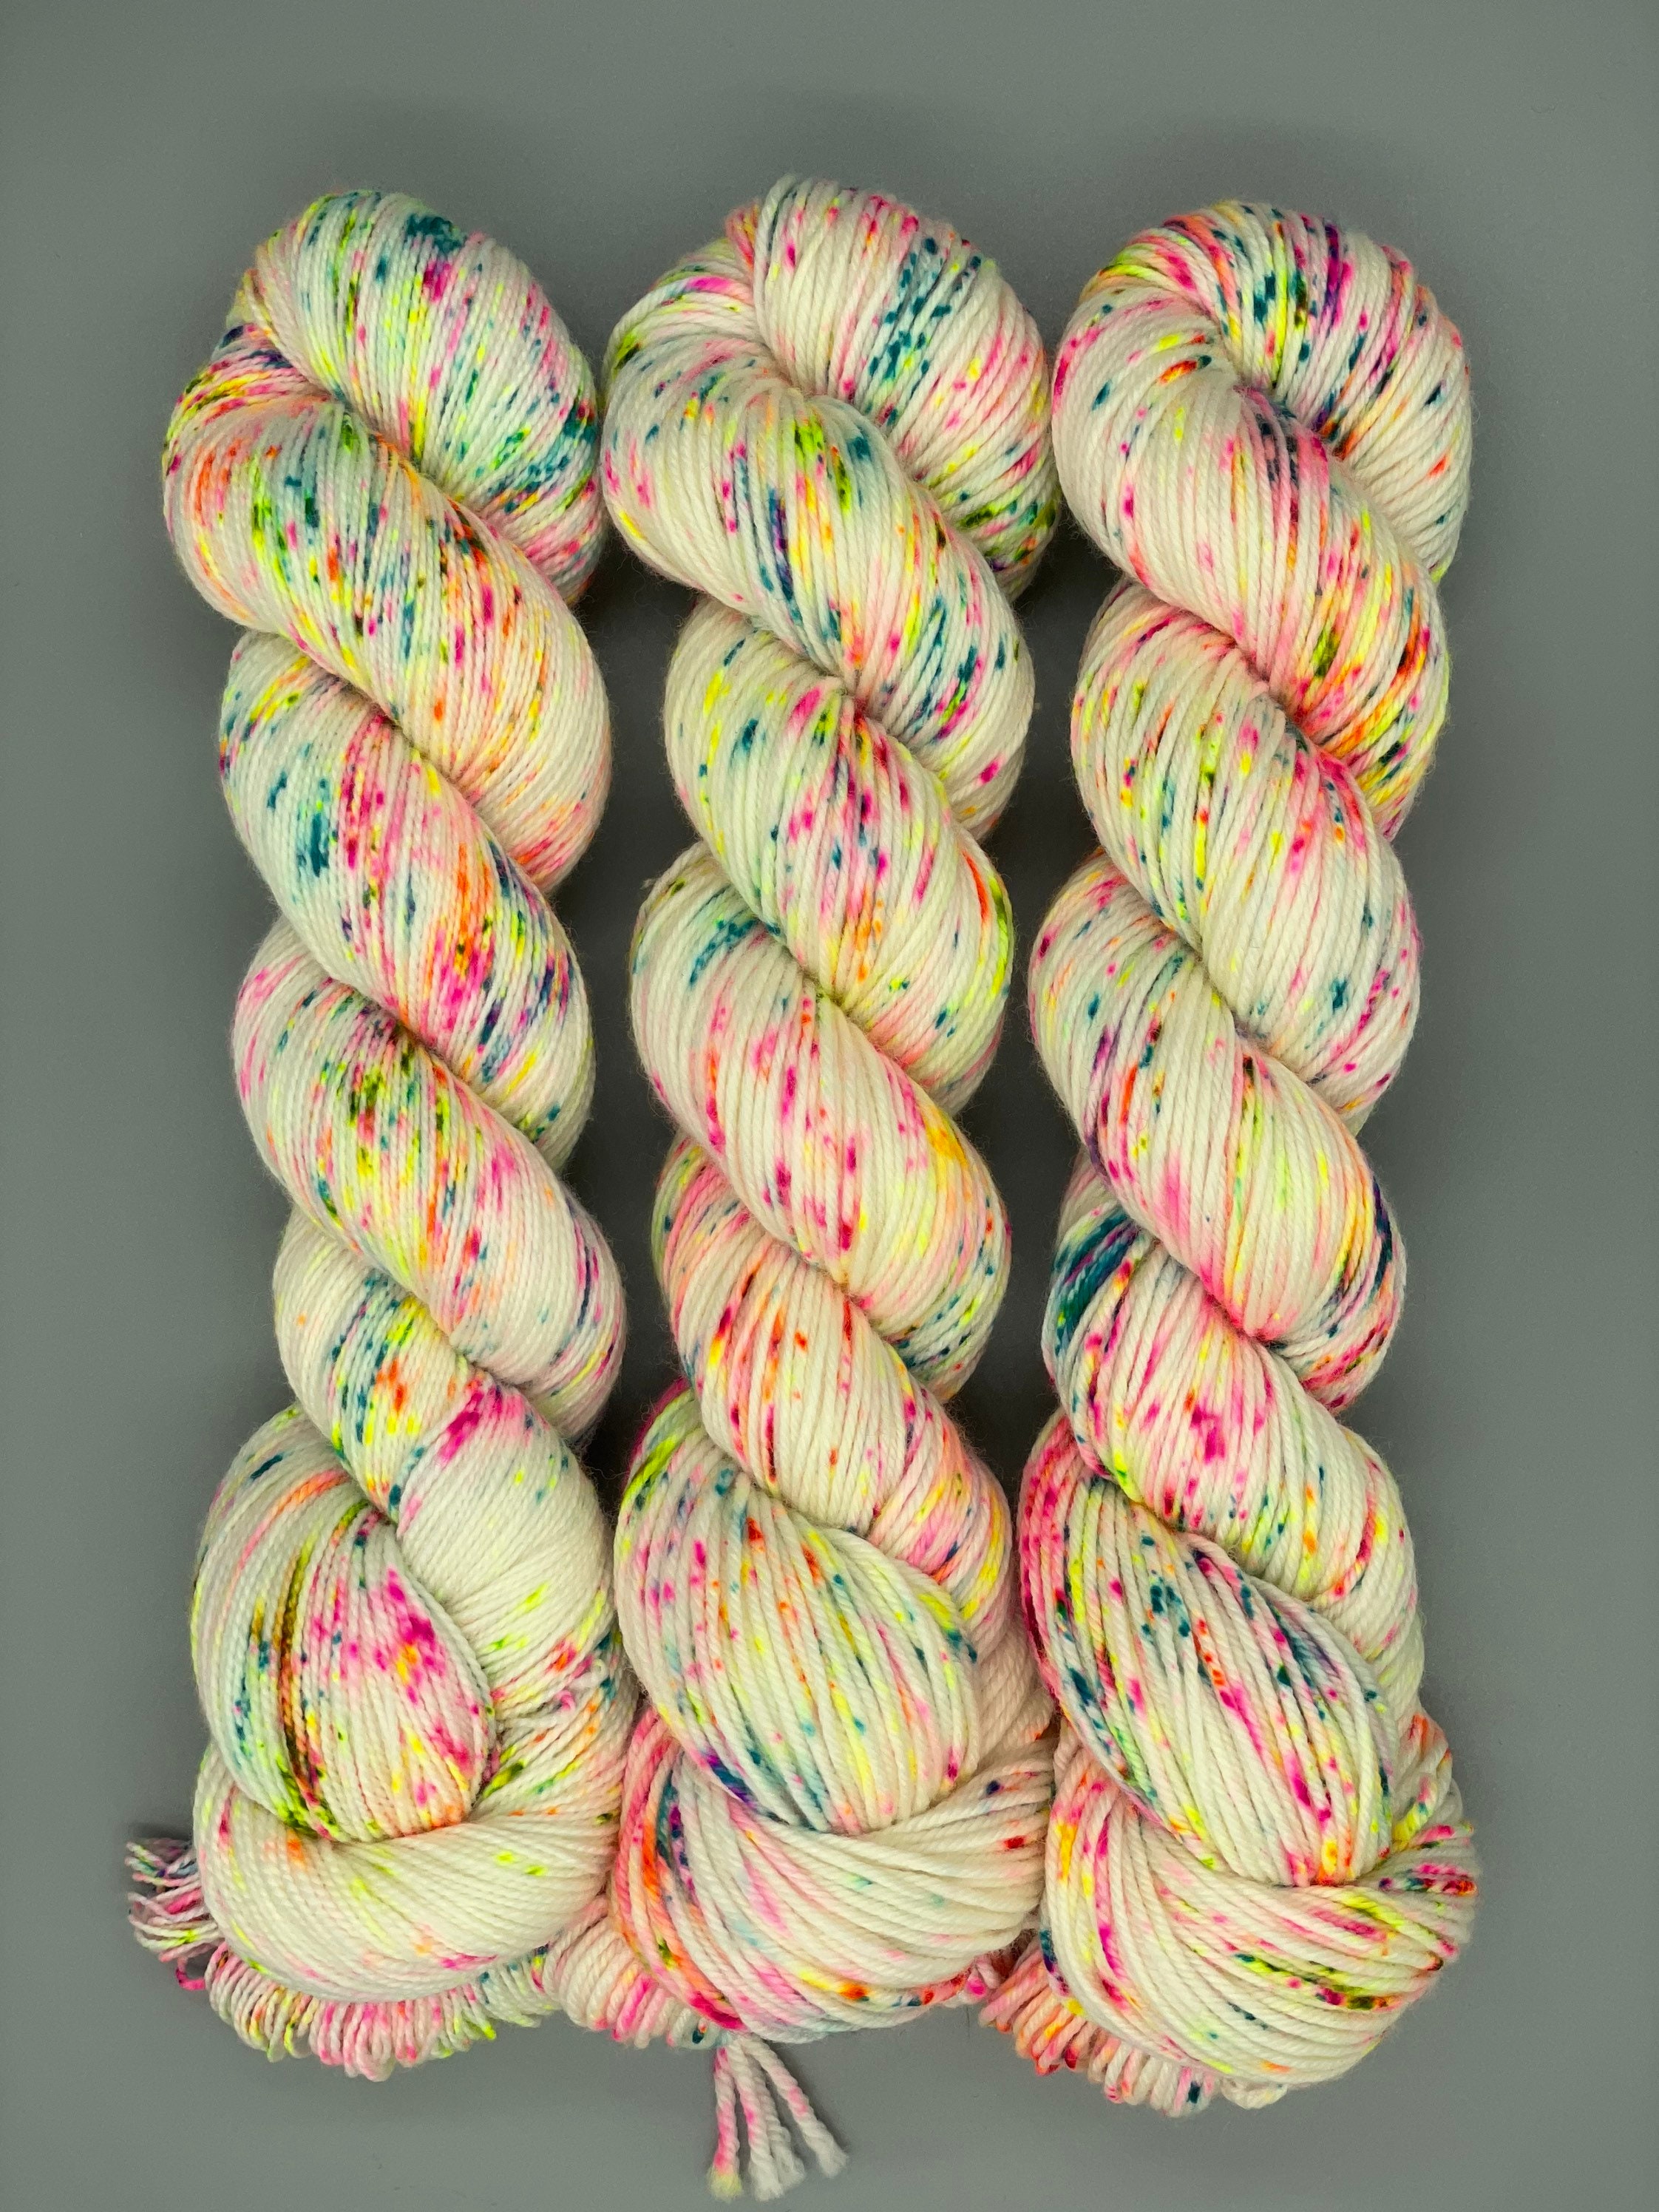 MARRY ME?  Speckled Hand Dyed Yarn — Yarn Café Creations